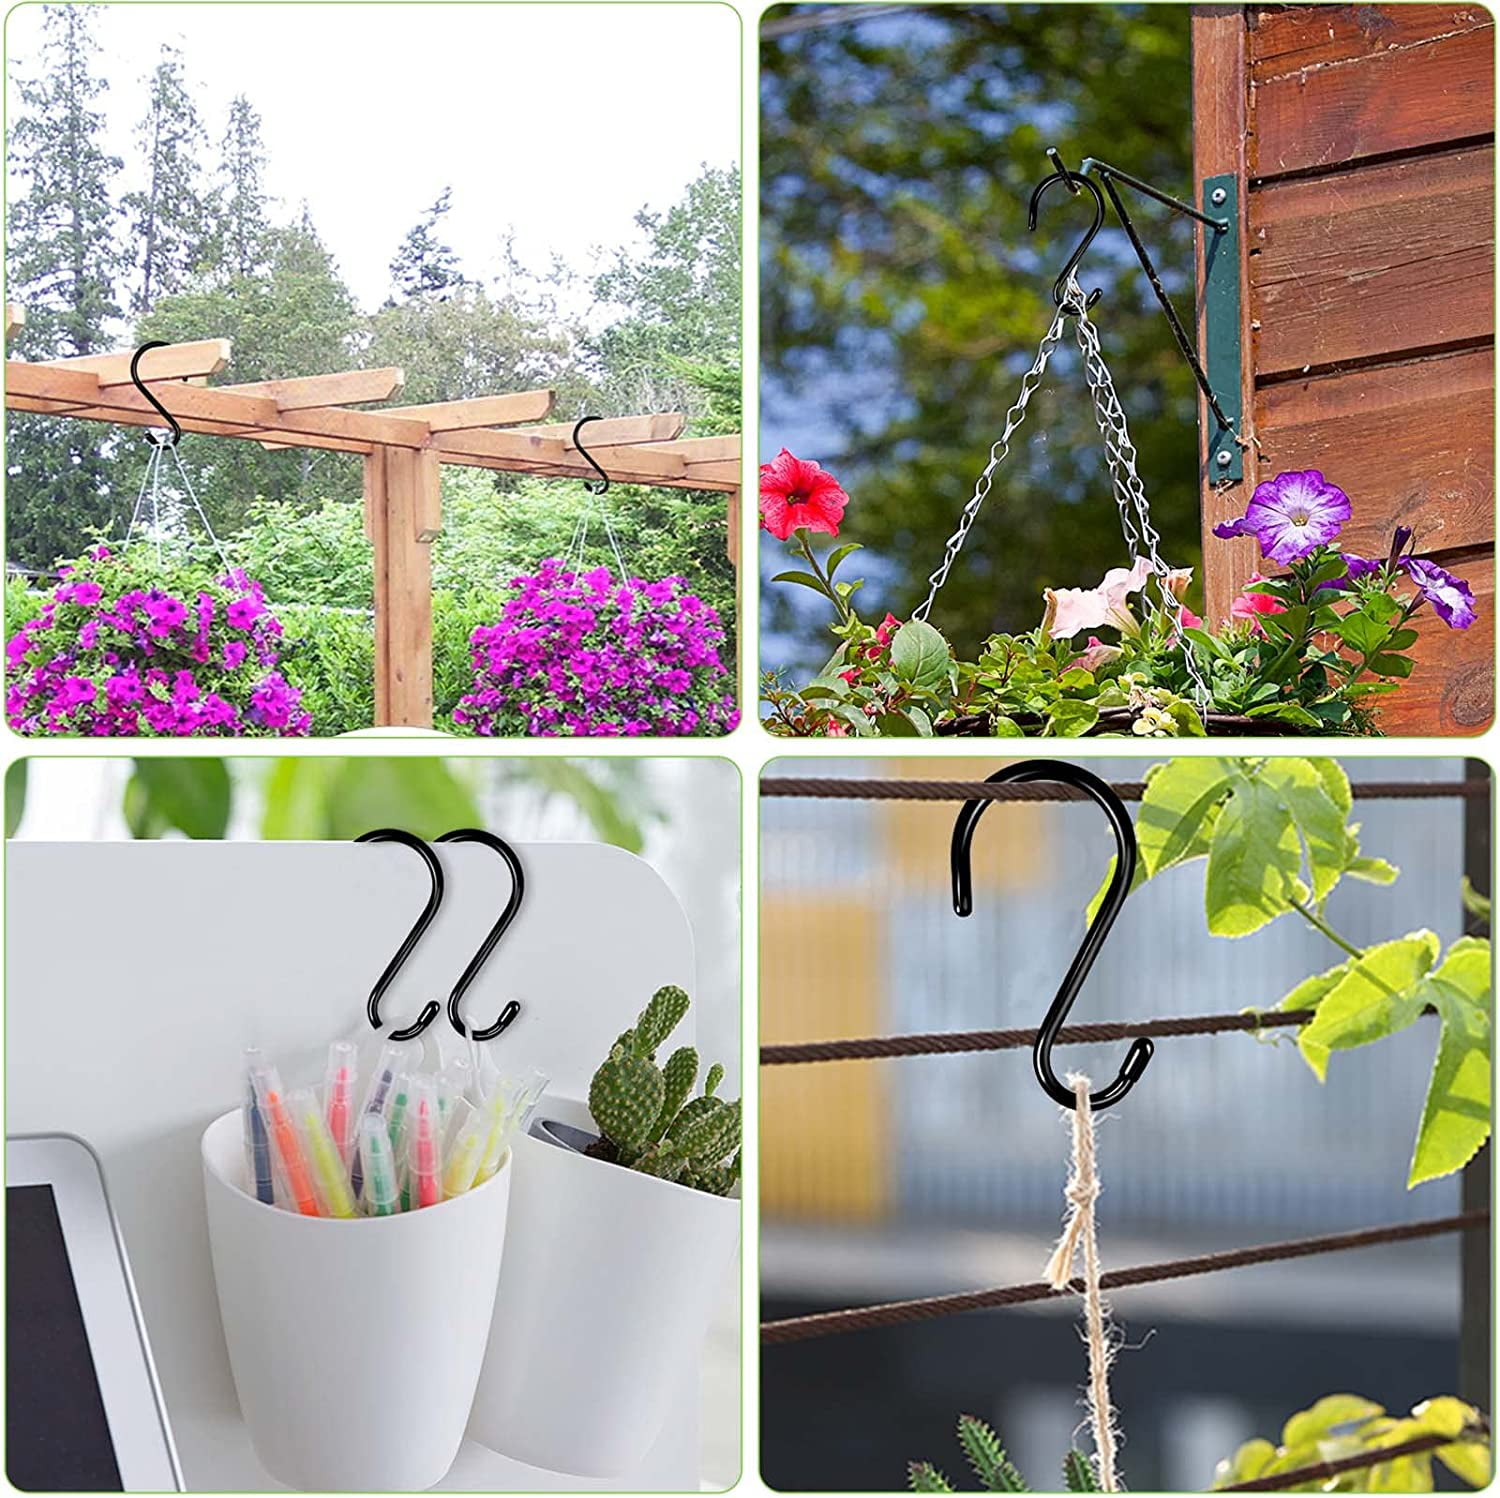 DINGEE 8 inch S Hooks Heavy Duty,6 Pack Extra Large Metal S Shaped Hooks for Hanging Plants Outdoors,Closet, Flower,Basket, Patio,Bird Feeders, Bird